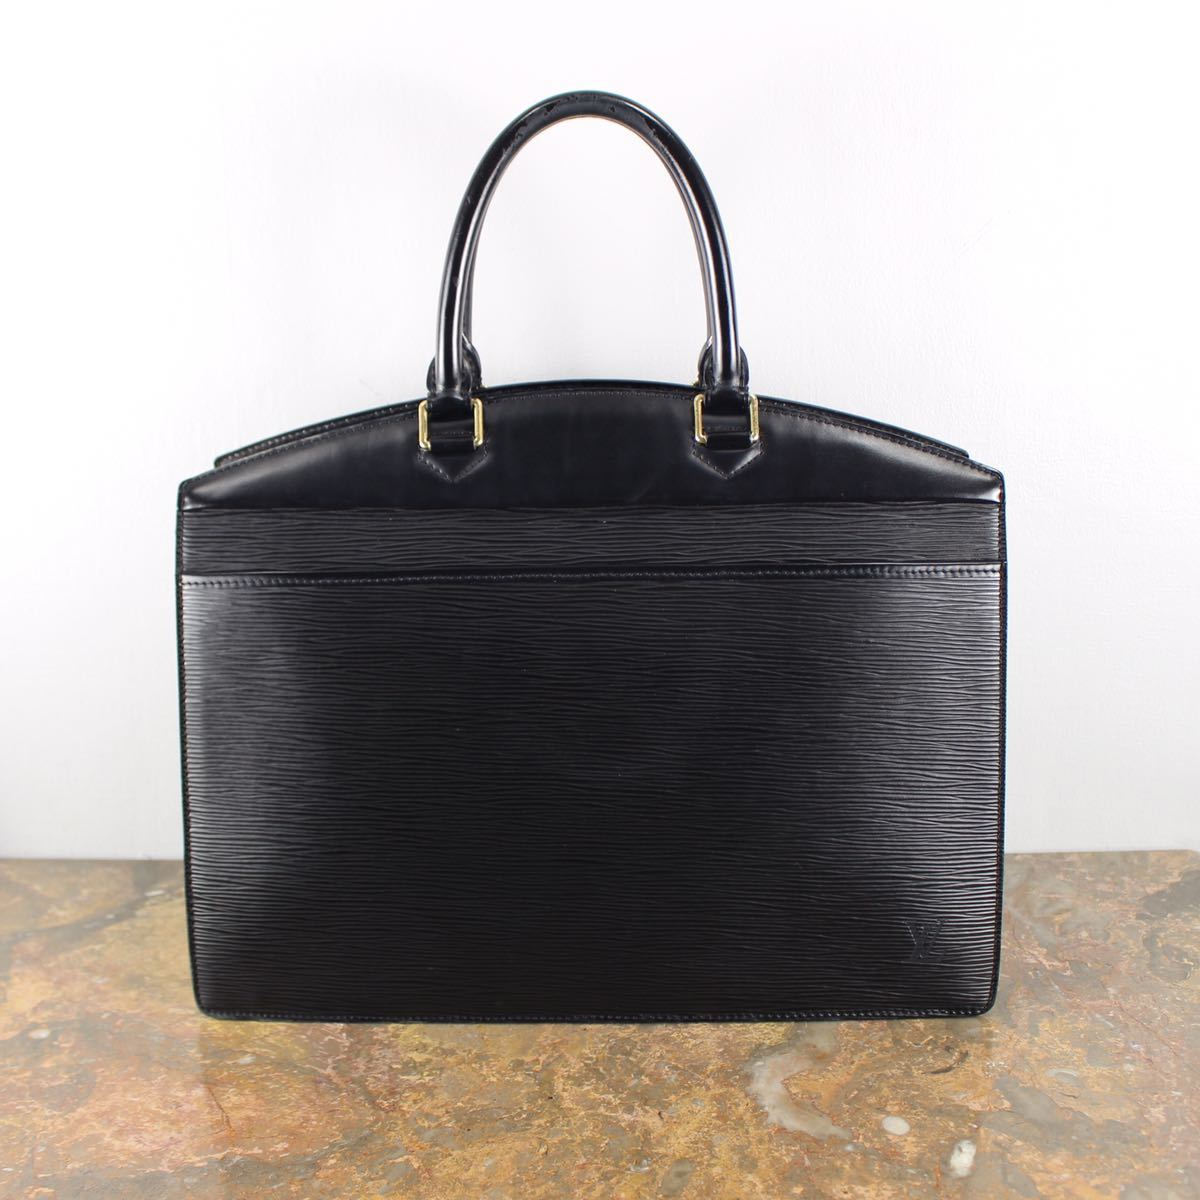 LOUIS VUITTON M48182 TH0024 LEATHER HAND BAG MADE IN FRANCE/ルイヴィトンエピリヴィエラレザーハンドバッグ